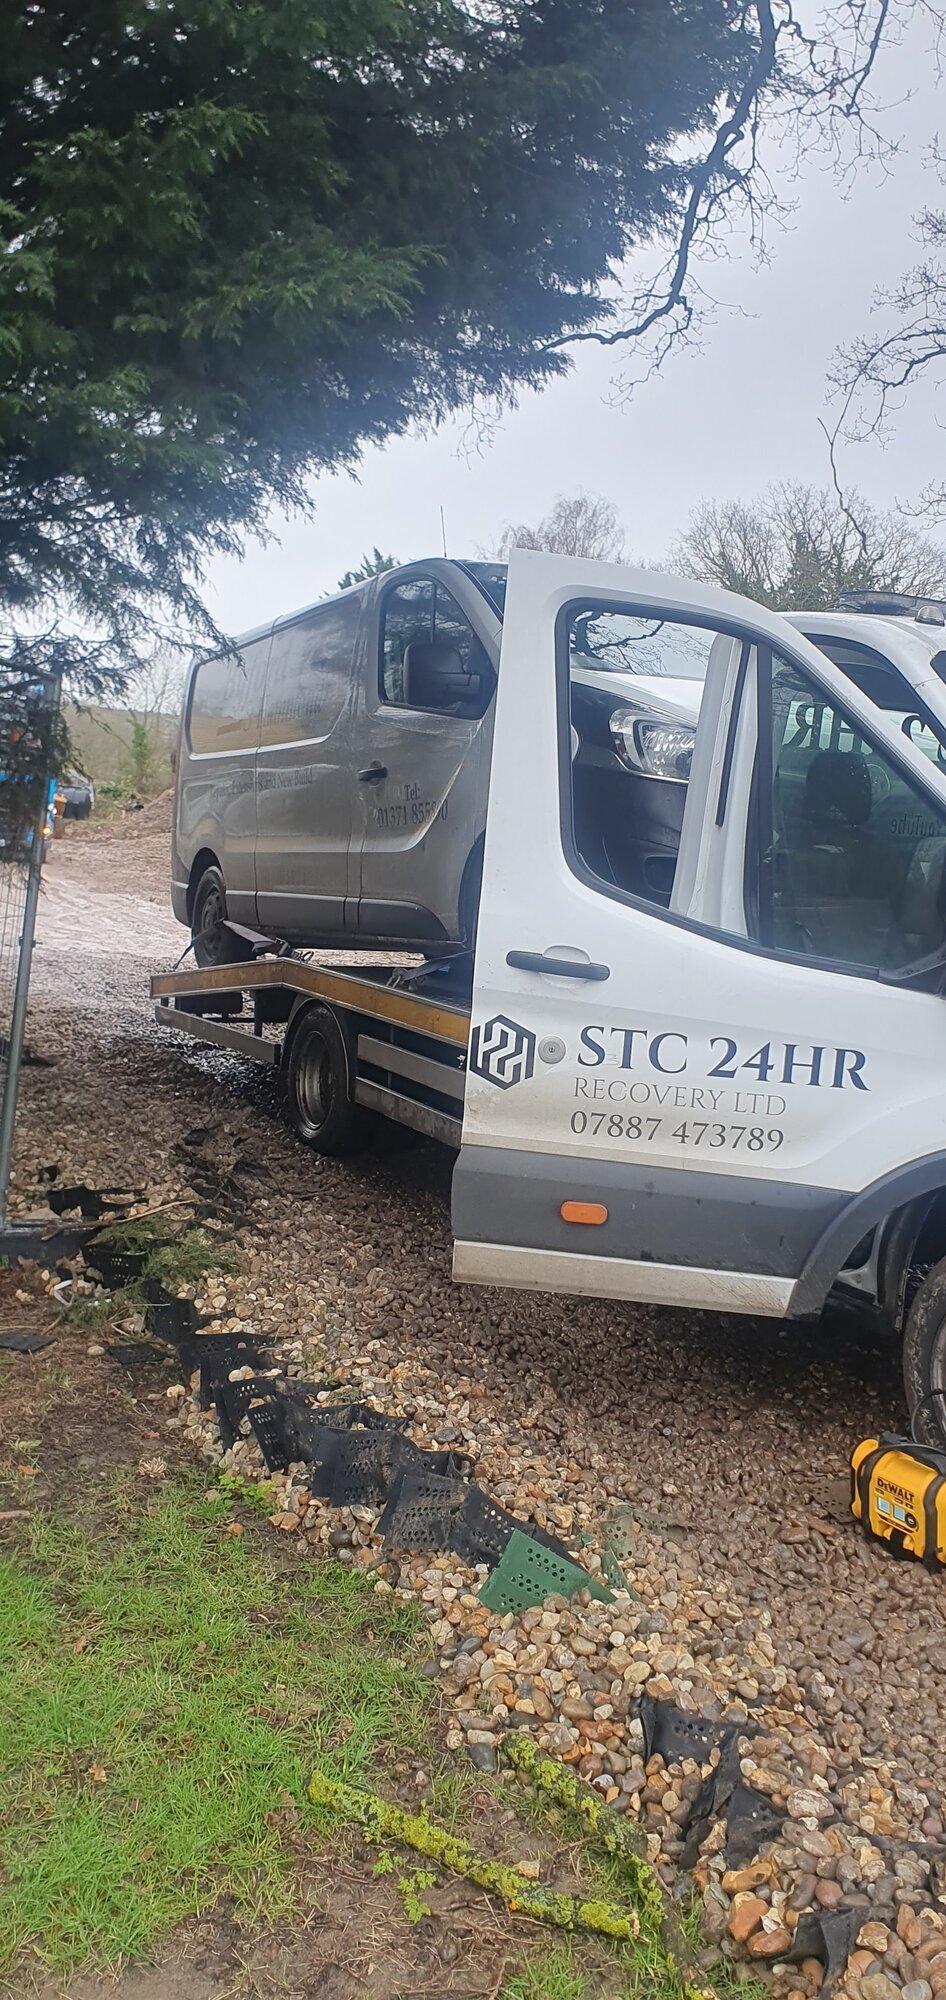 Images STC 24hr recovery ltd